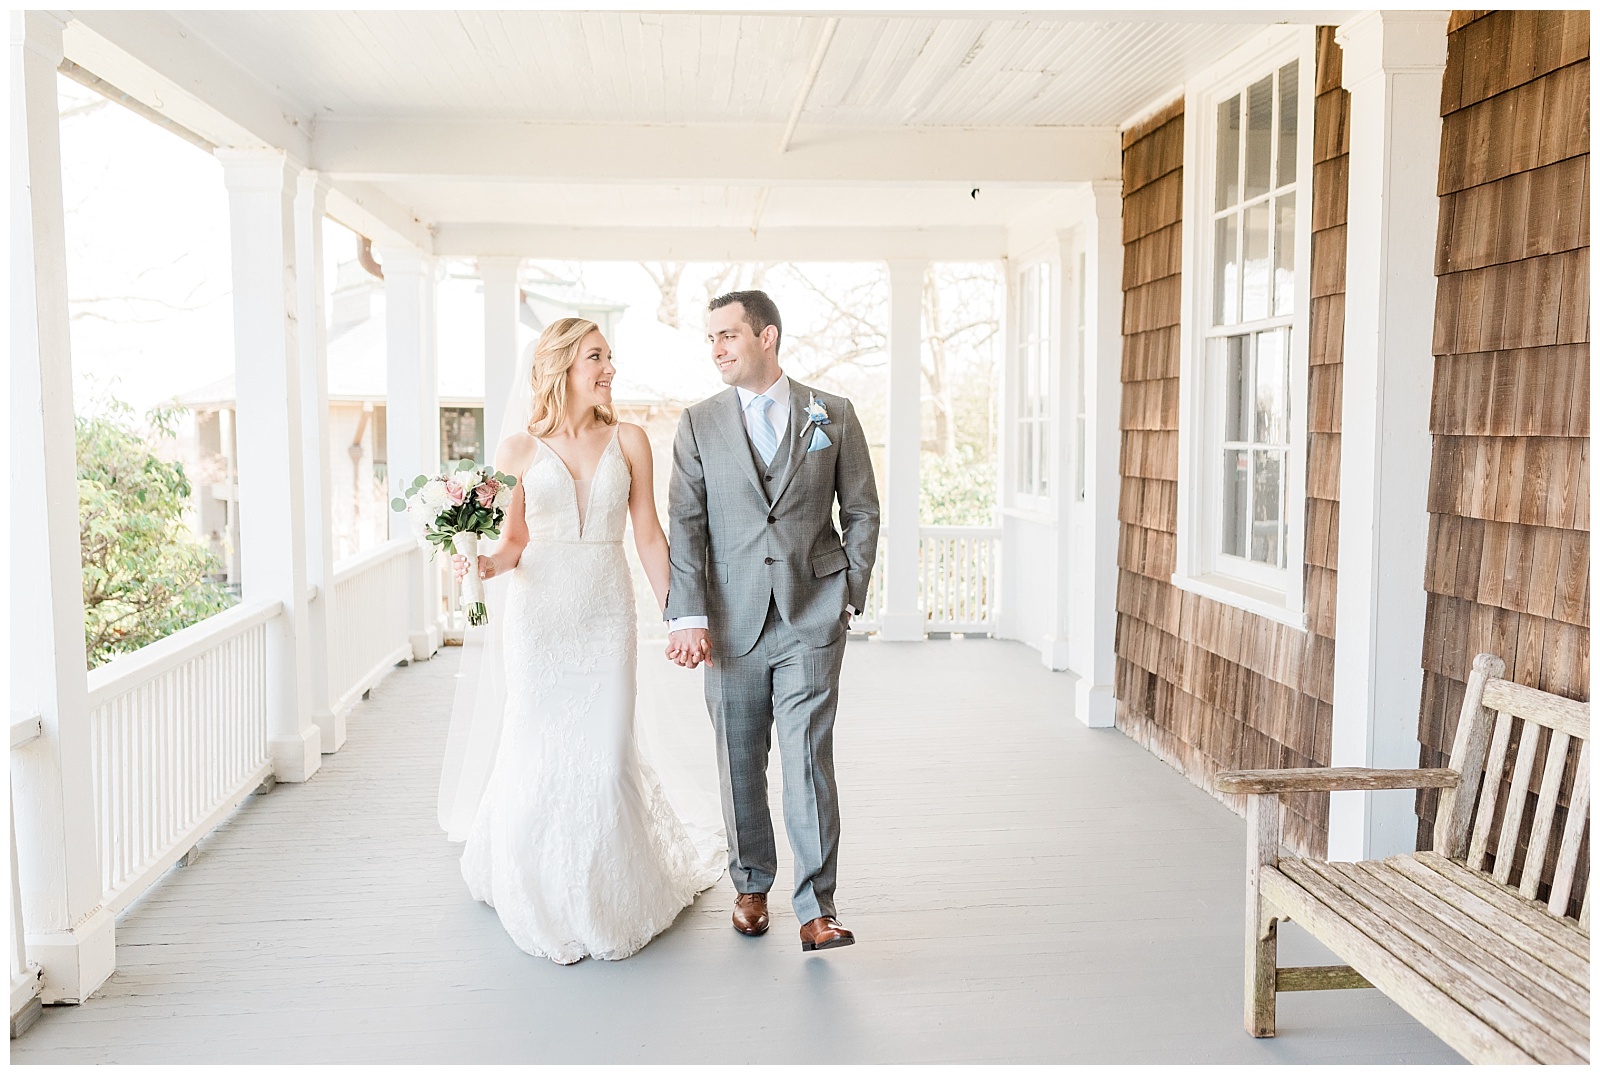 Bride and groom walk holding hands on a covered porch.